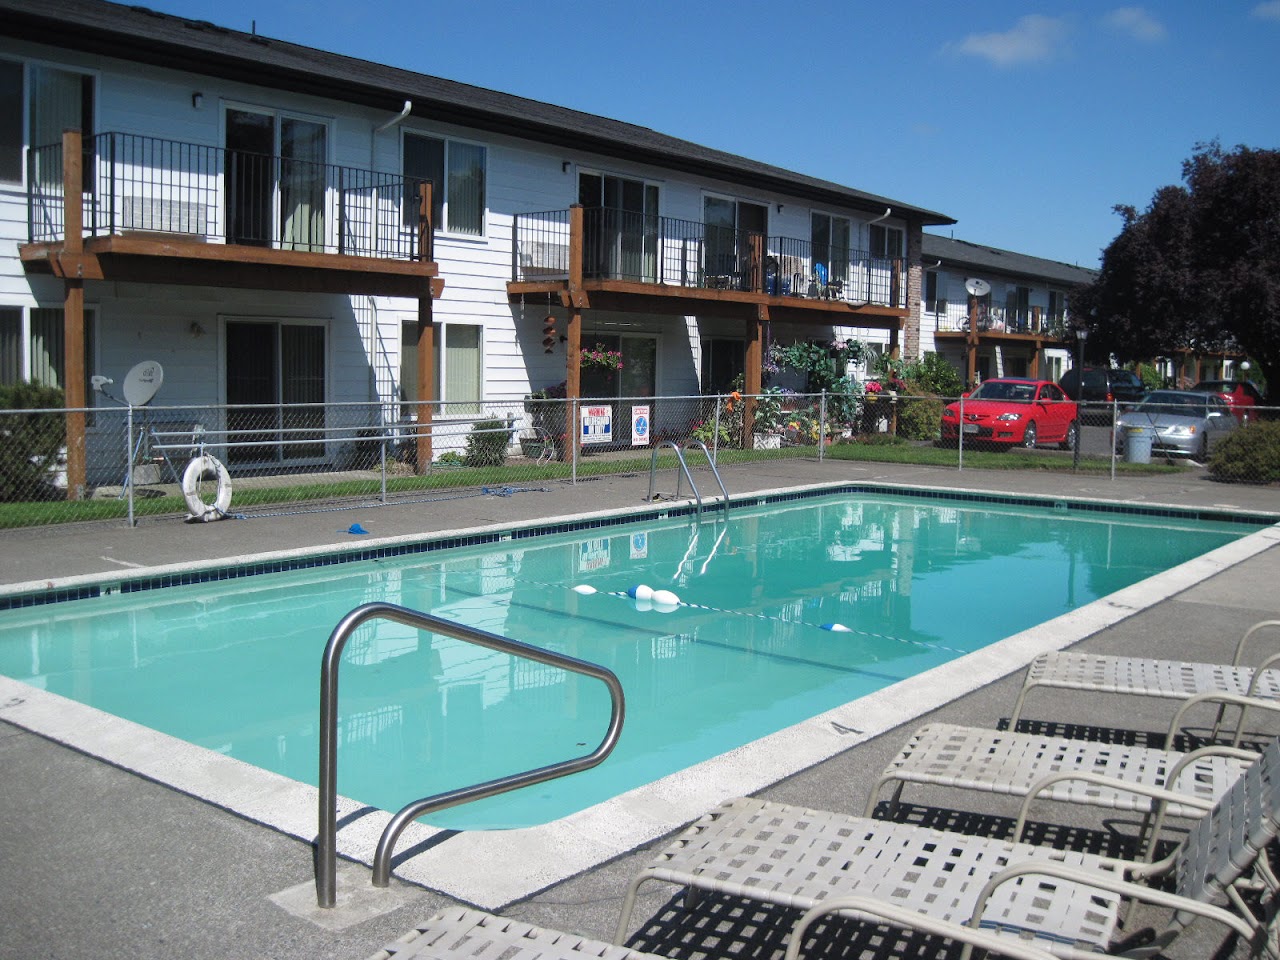 Photo of GATEWAY PARK APTS. Affordable housing located at 510 NE 100TH AVE PORTLAND, OR 97220